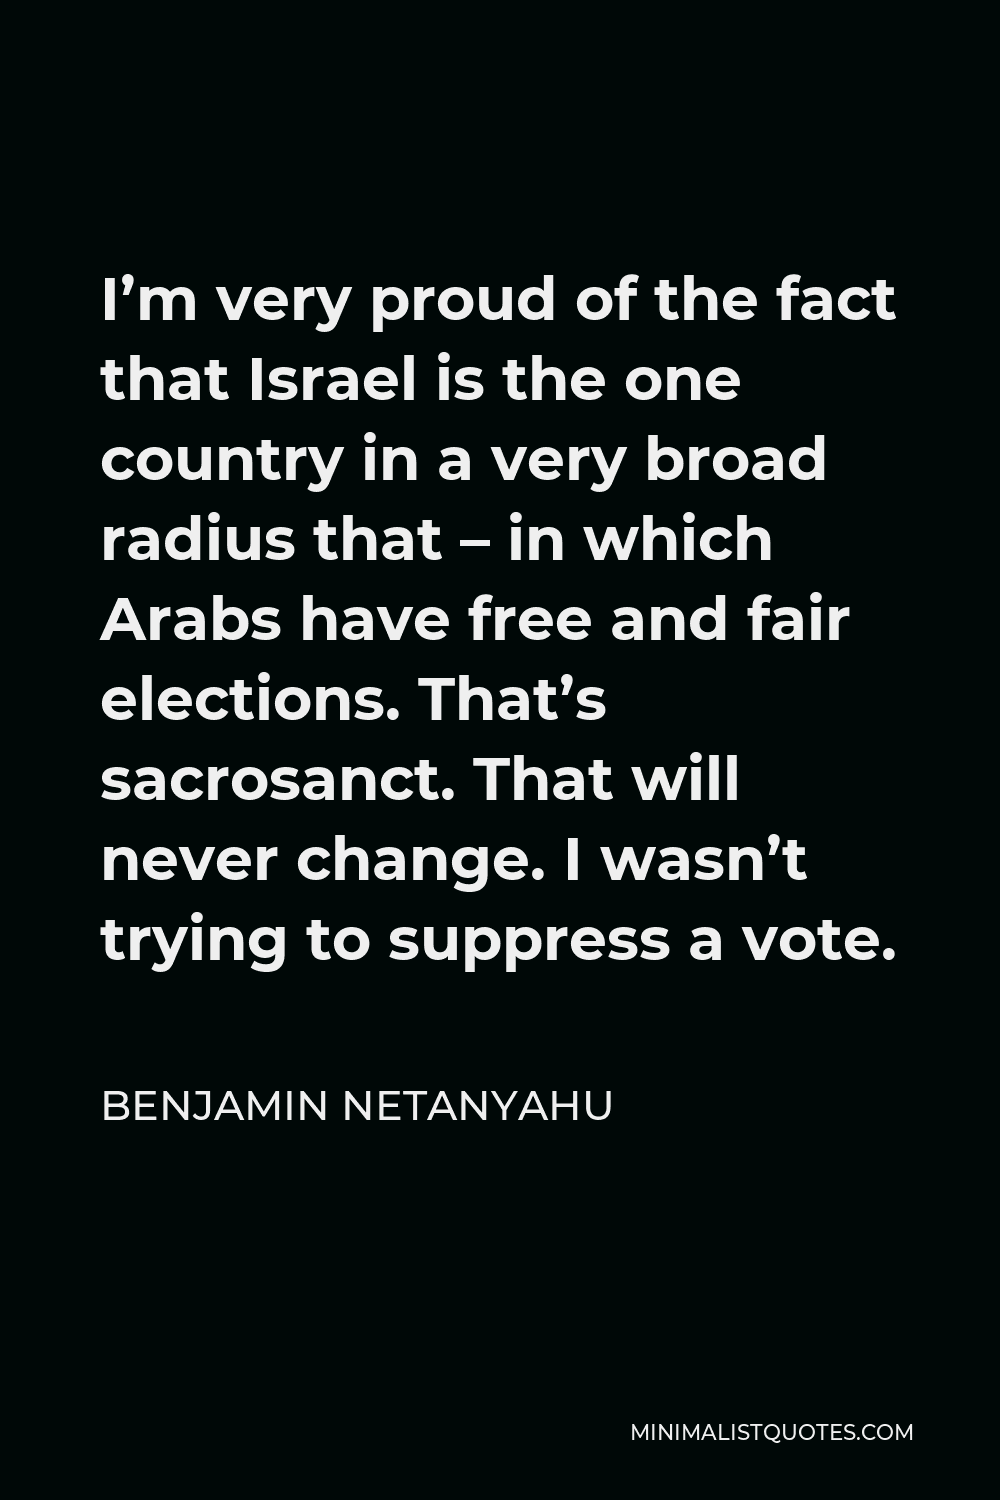 Benjamin Netanyahu Quote - I’m very proud of the fact that Israel is the one country in a very broad radius that – in which Arabs have free and fair elections. That’s sacrosanct. That will never change. I wasn’t trying to suppress a vote.